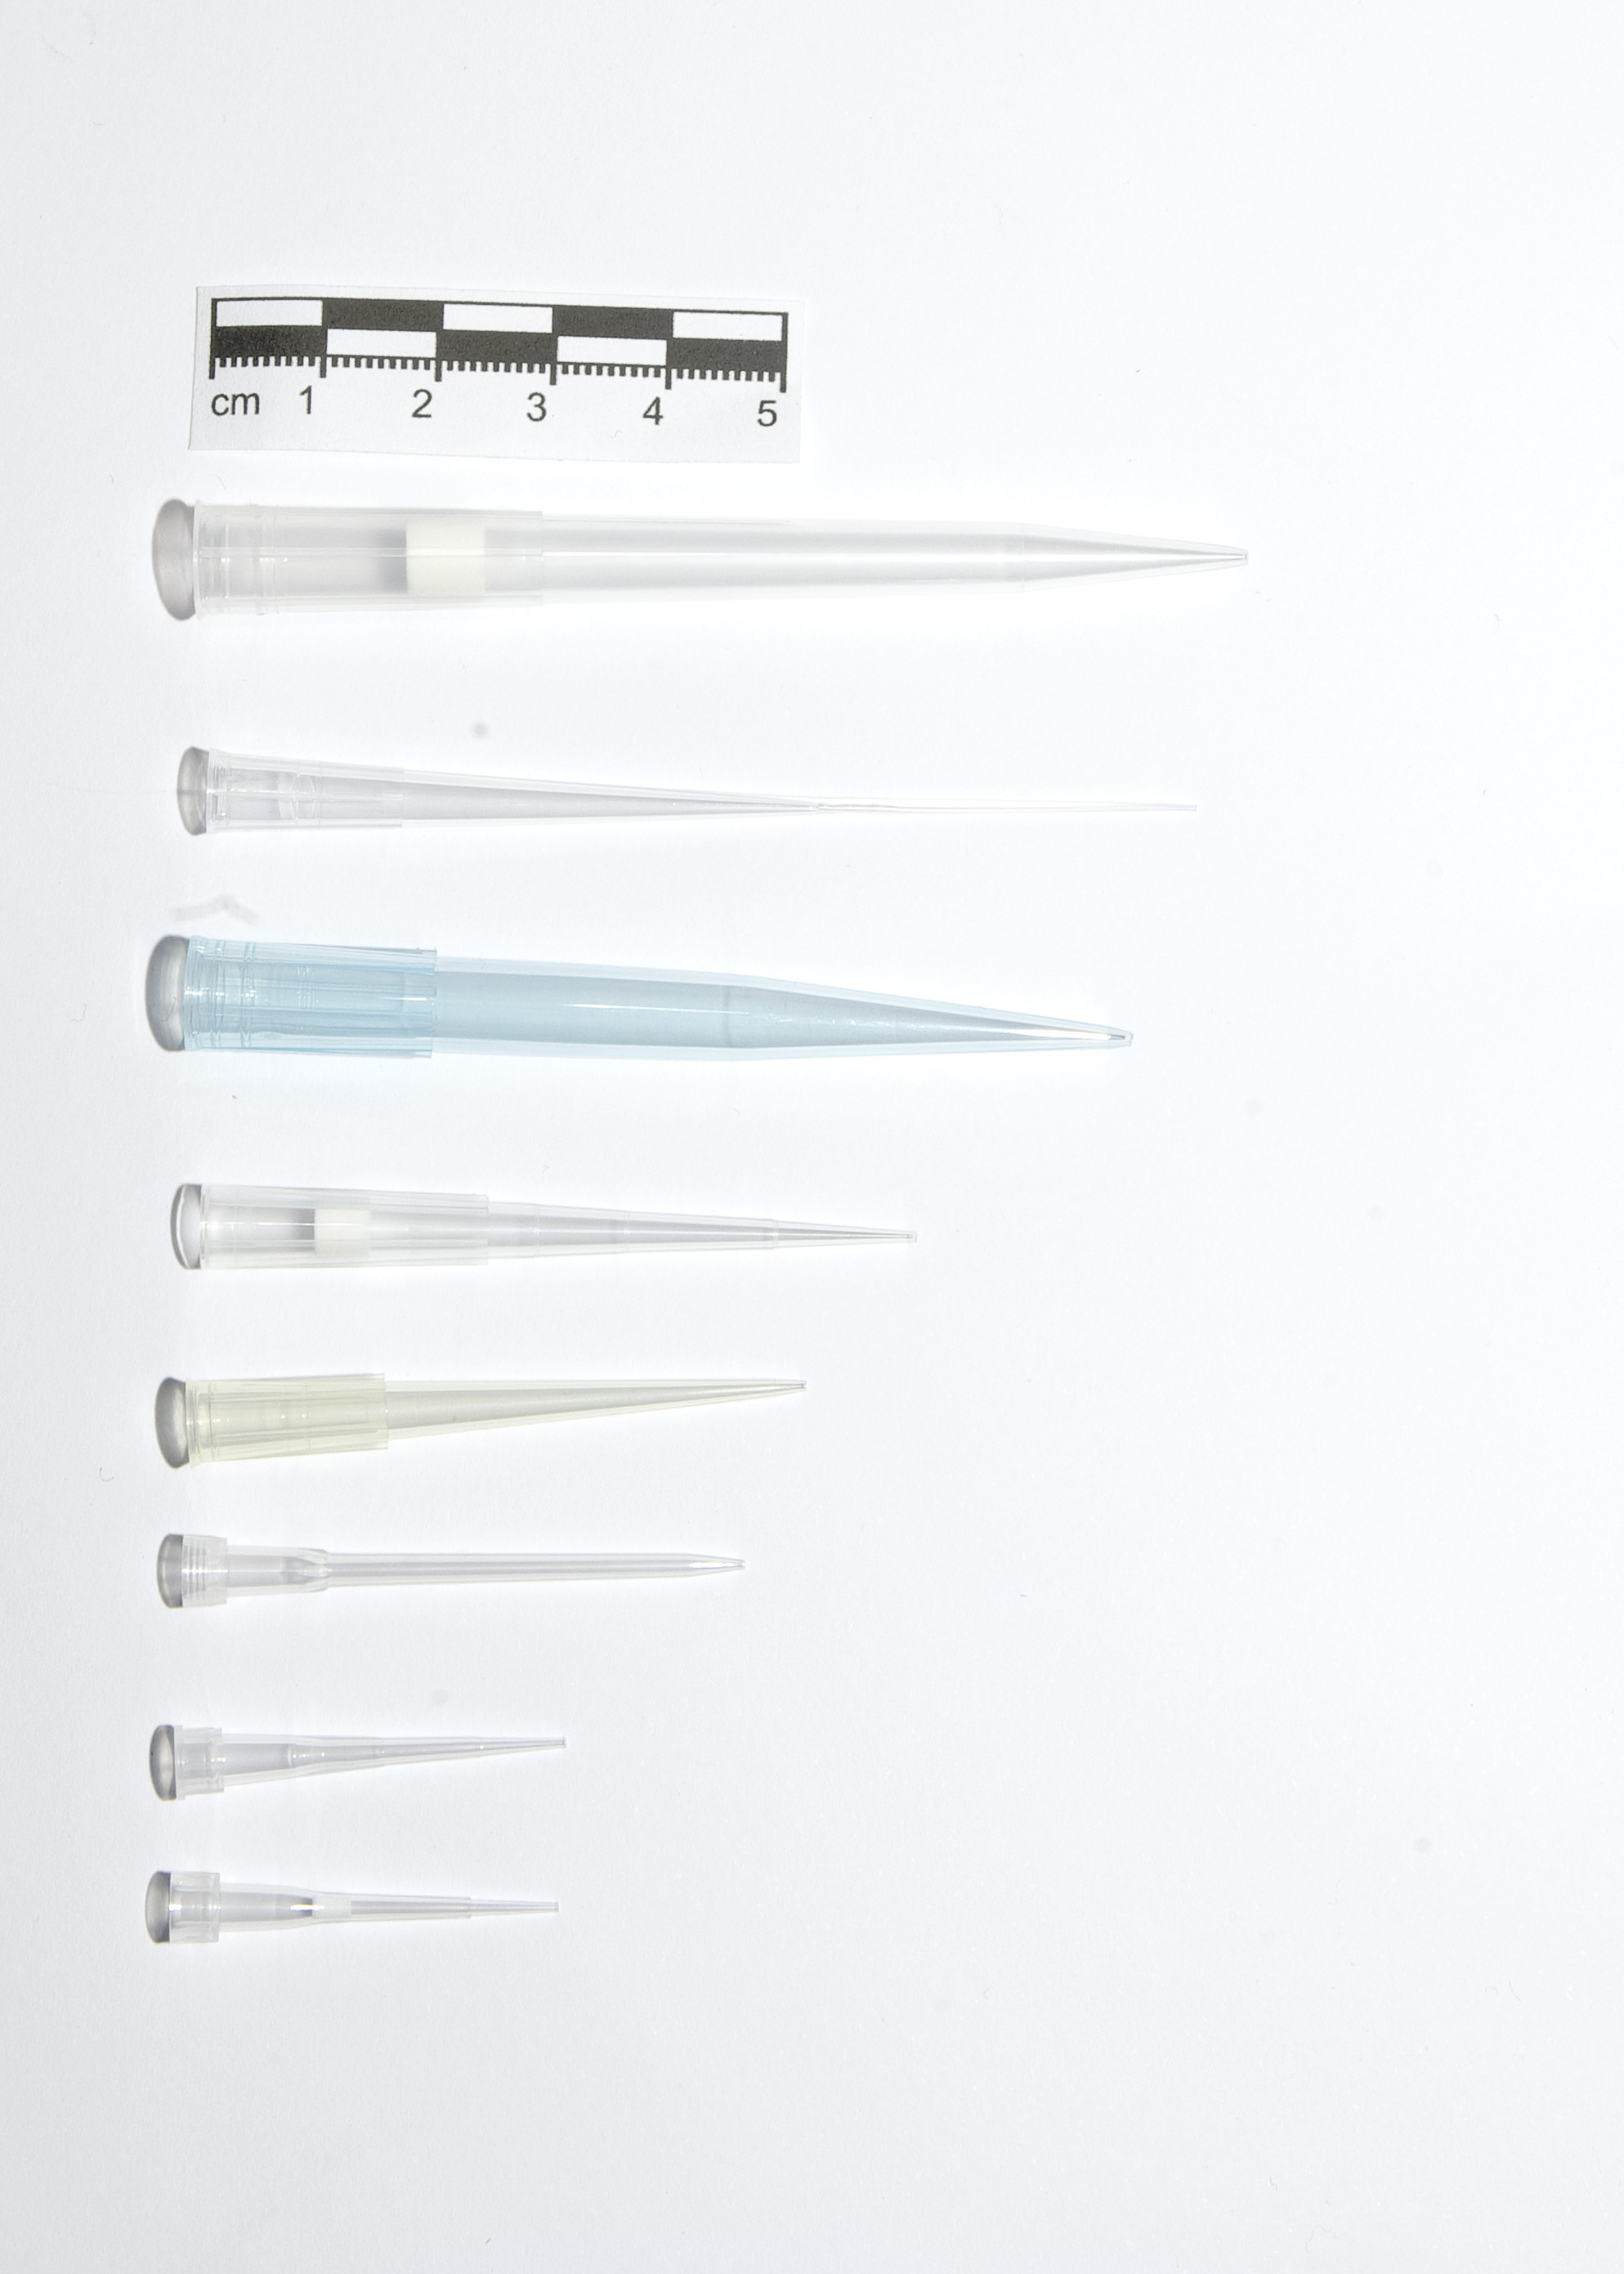 pipetting difference